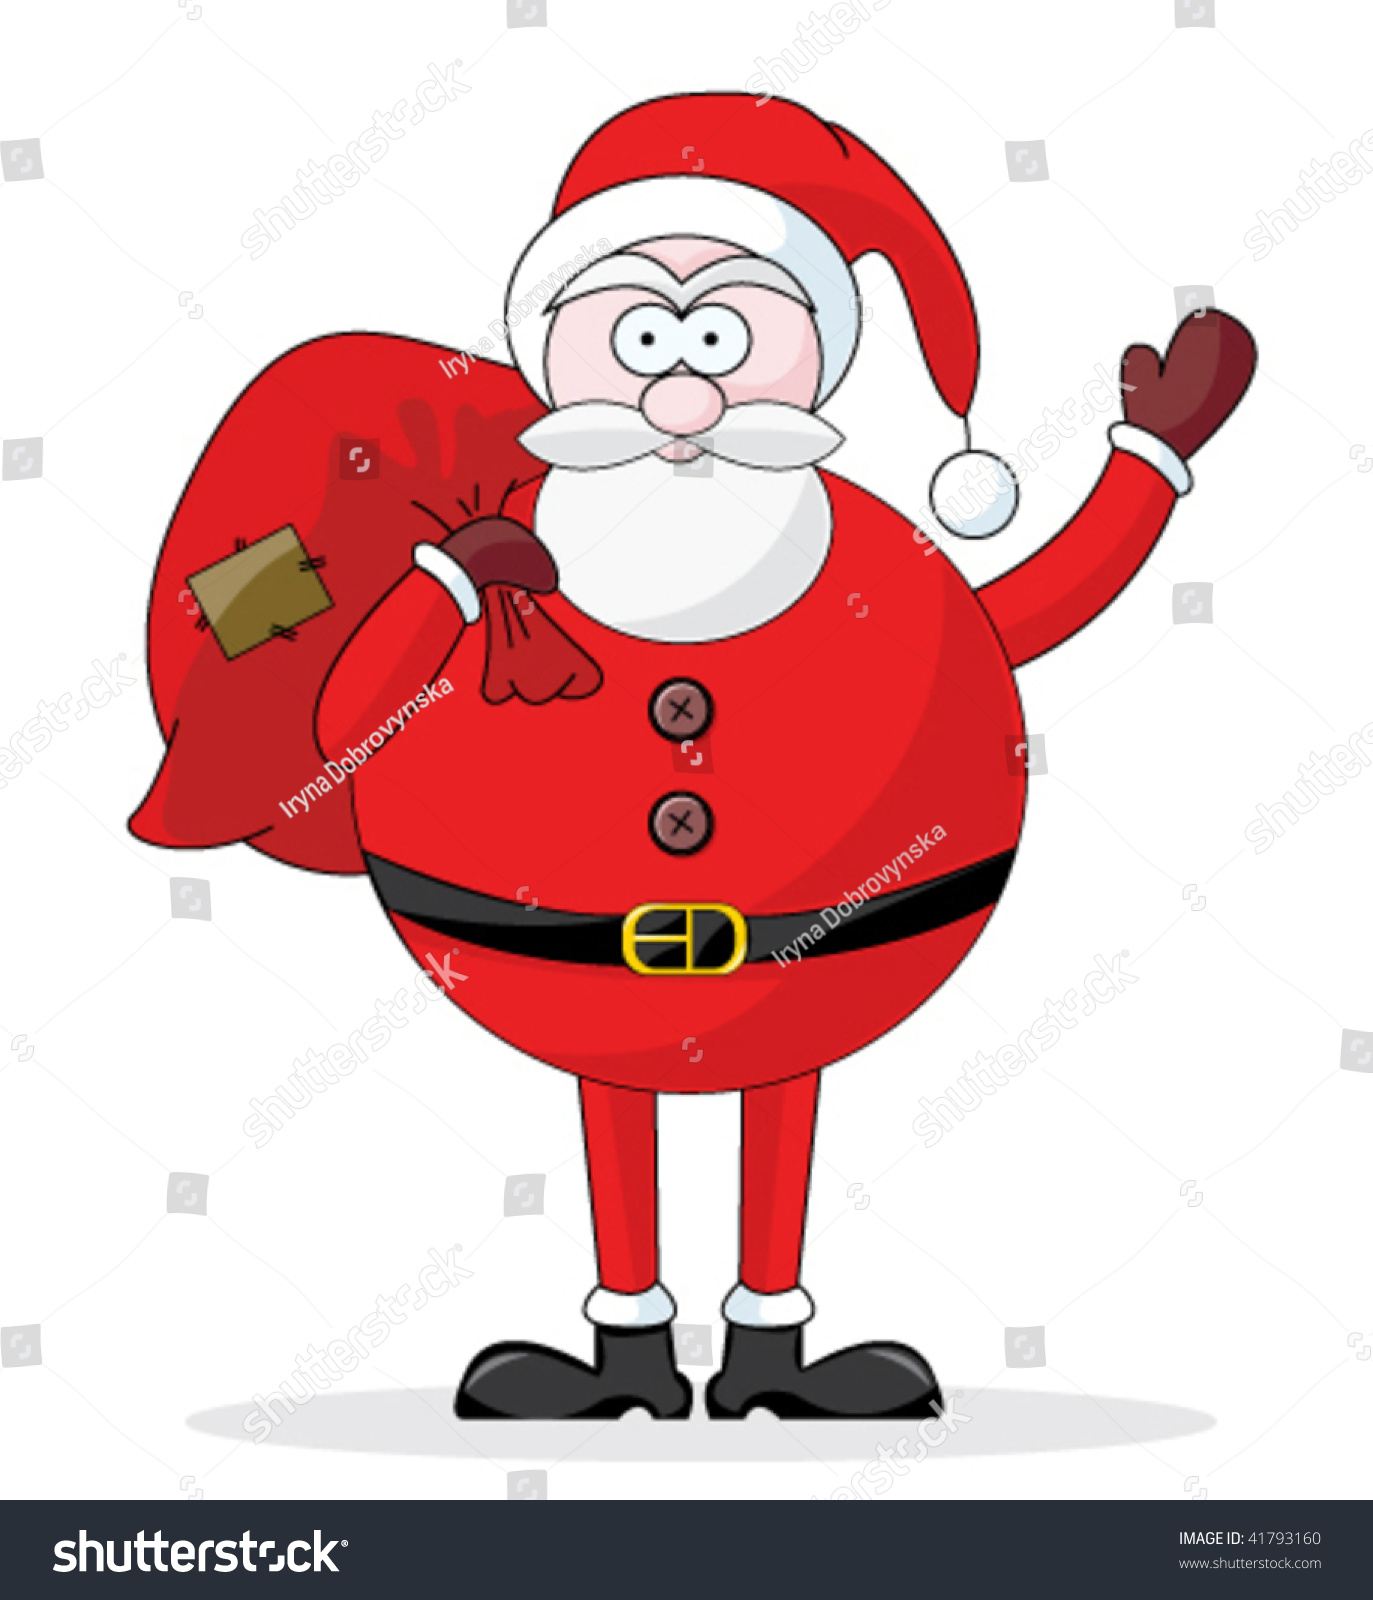 Santa Claus Holding A Bag With Gifts. Stock Vector Illustration ...